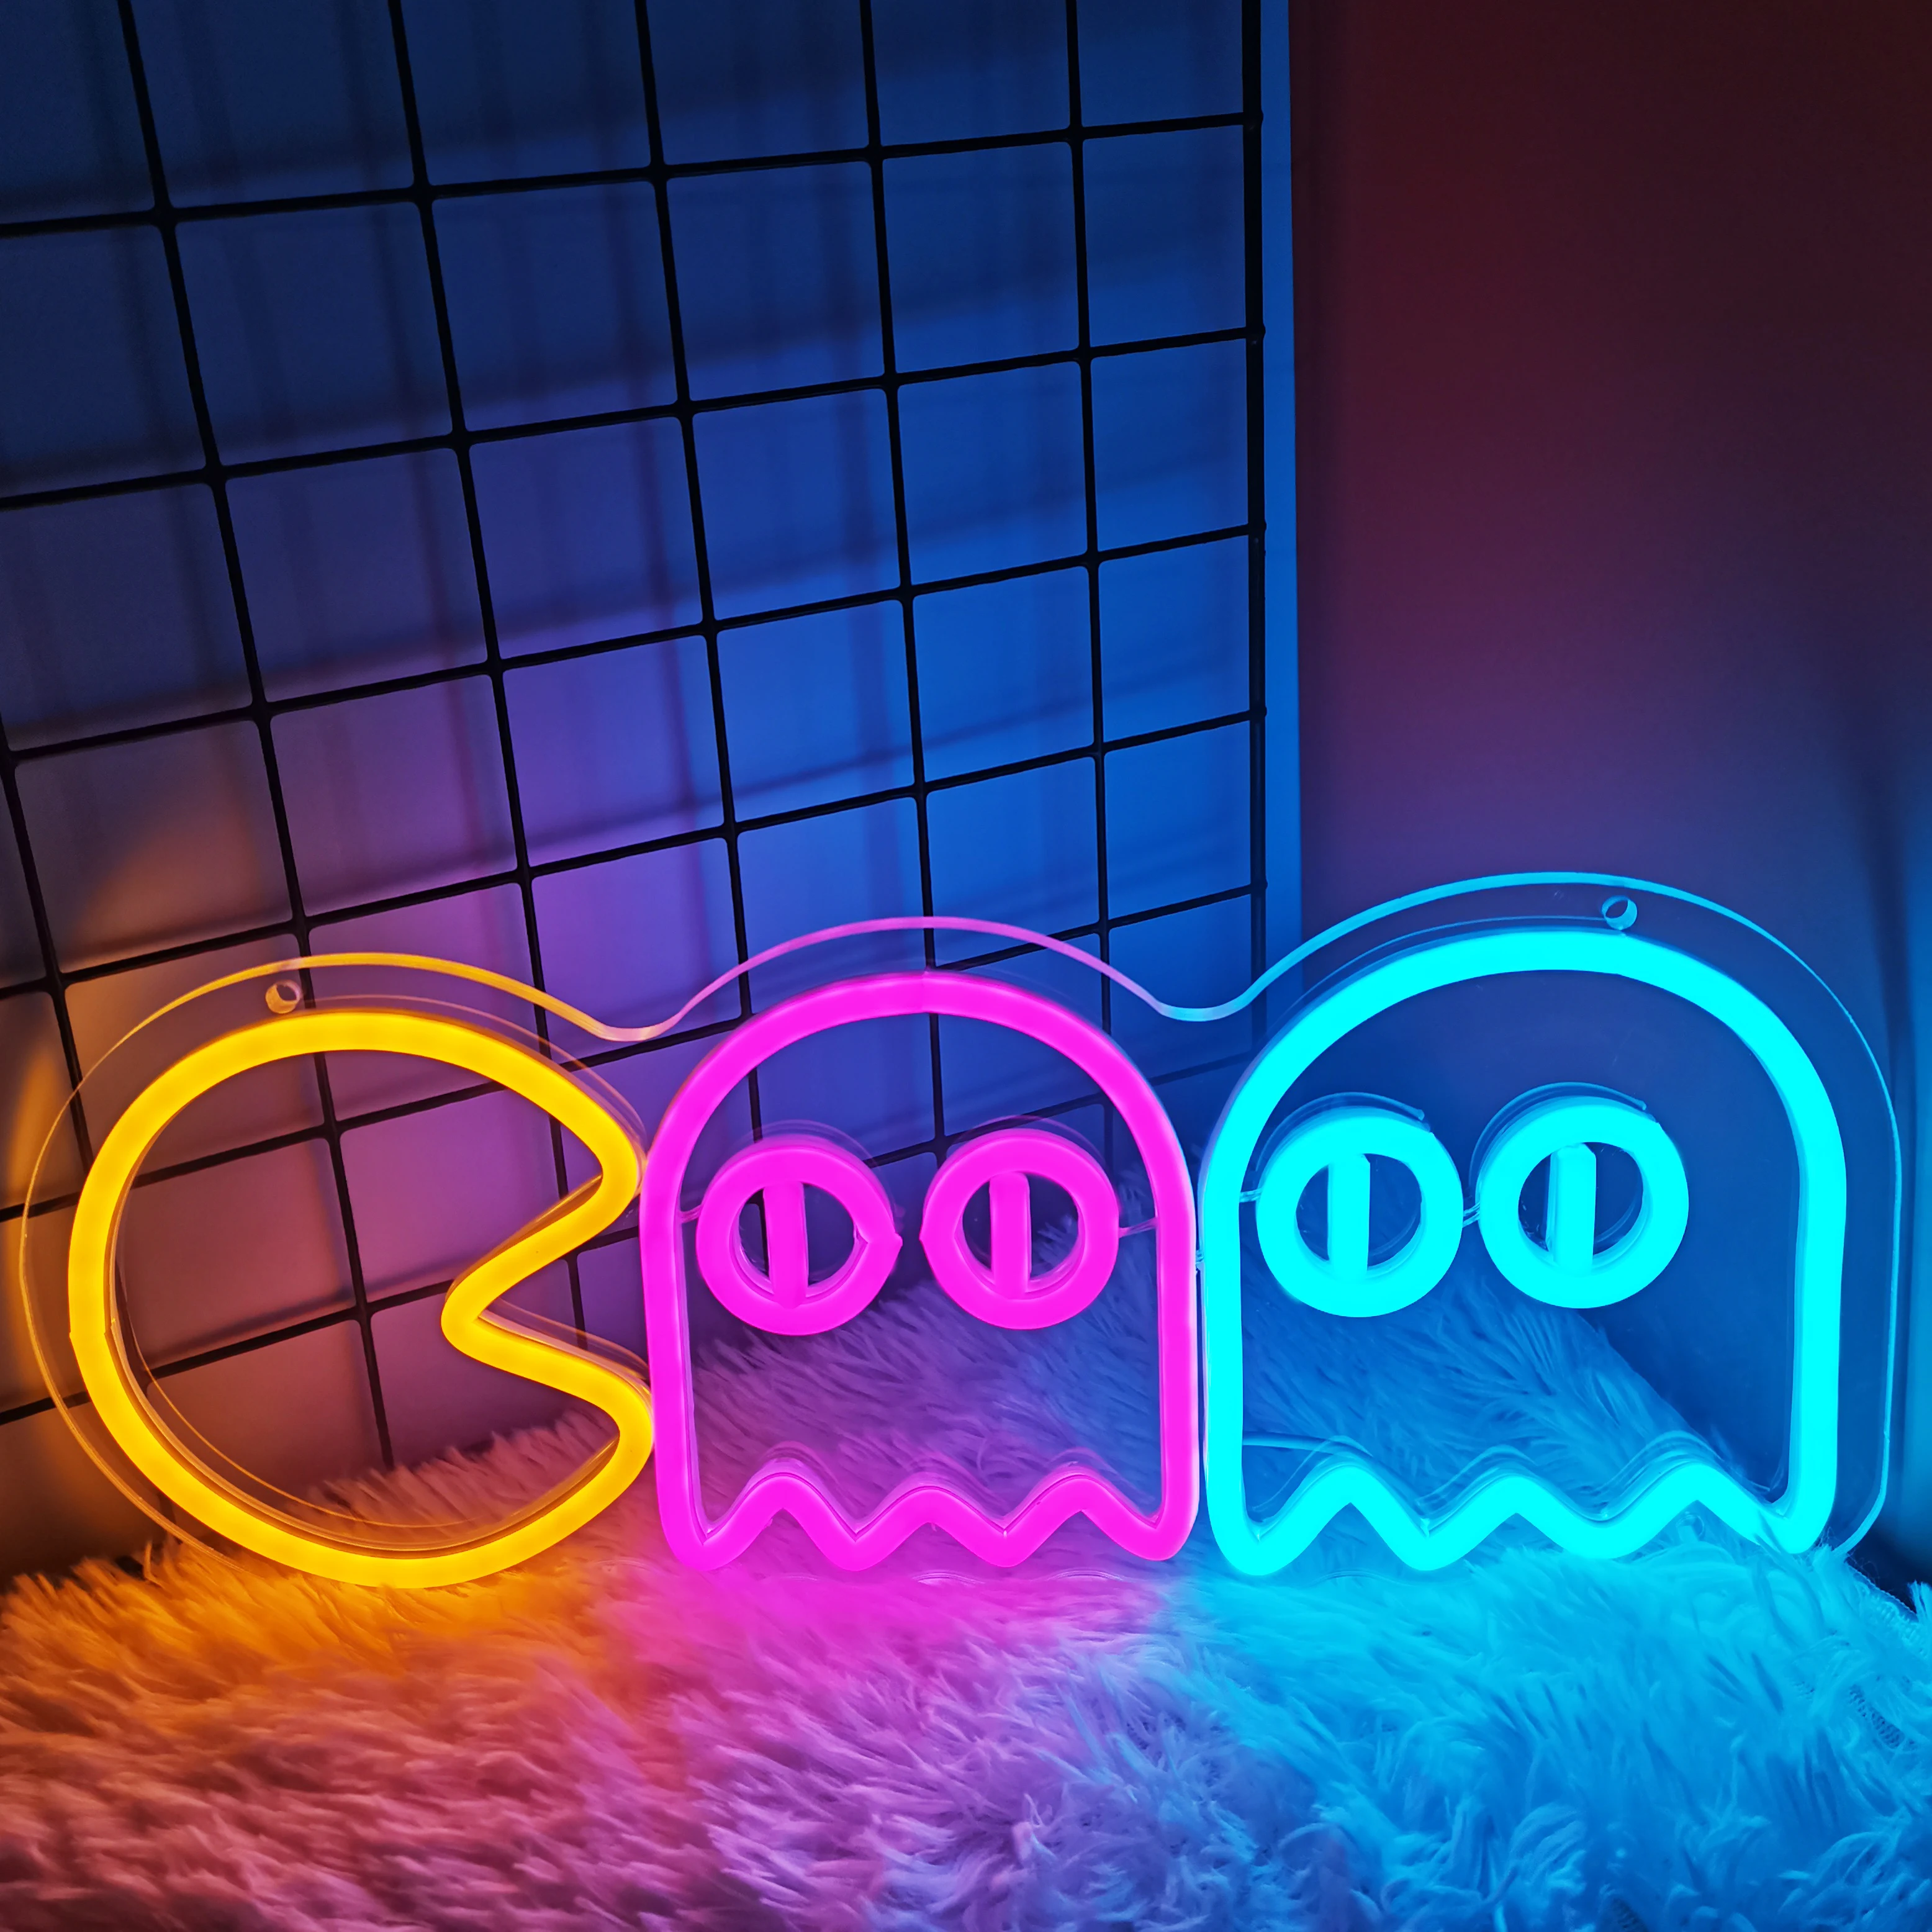 Game Neon Signs Ghost Led Retro Arcade Game Room Decor Led Wall for Bedroom Kids Room Bar Halloween Party Christmas